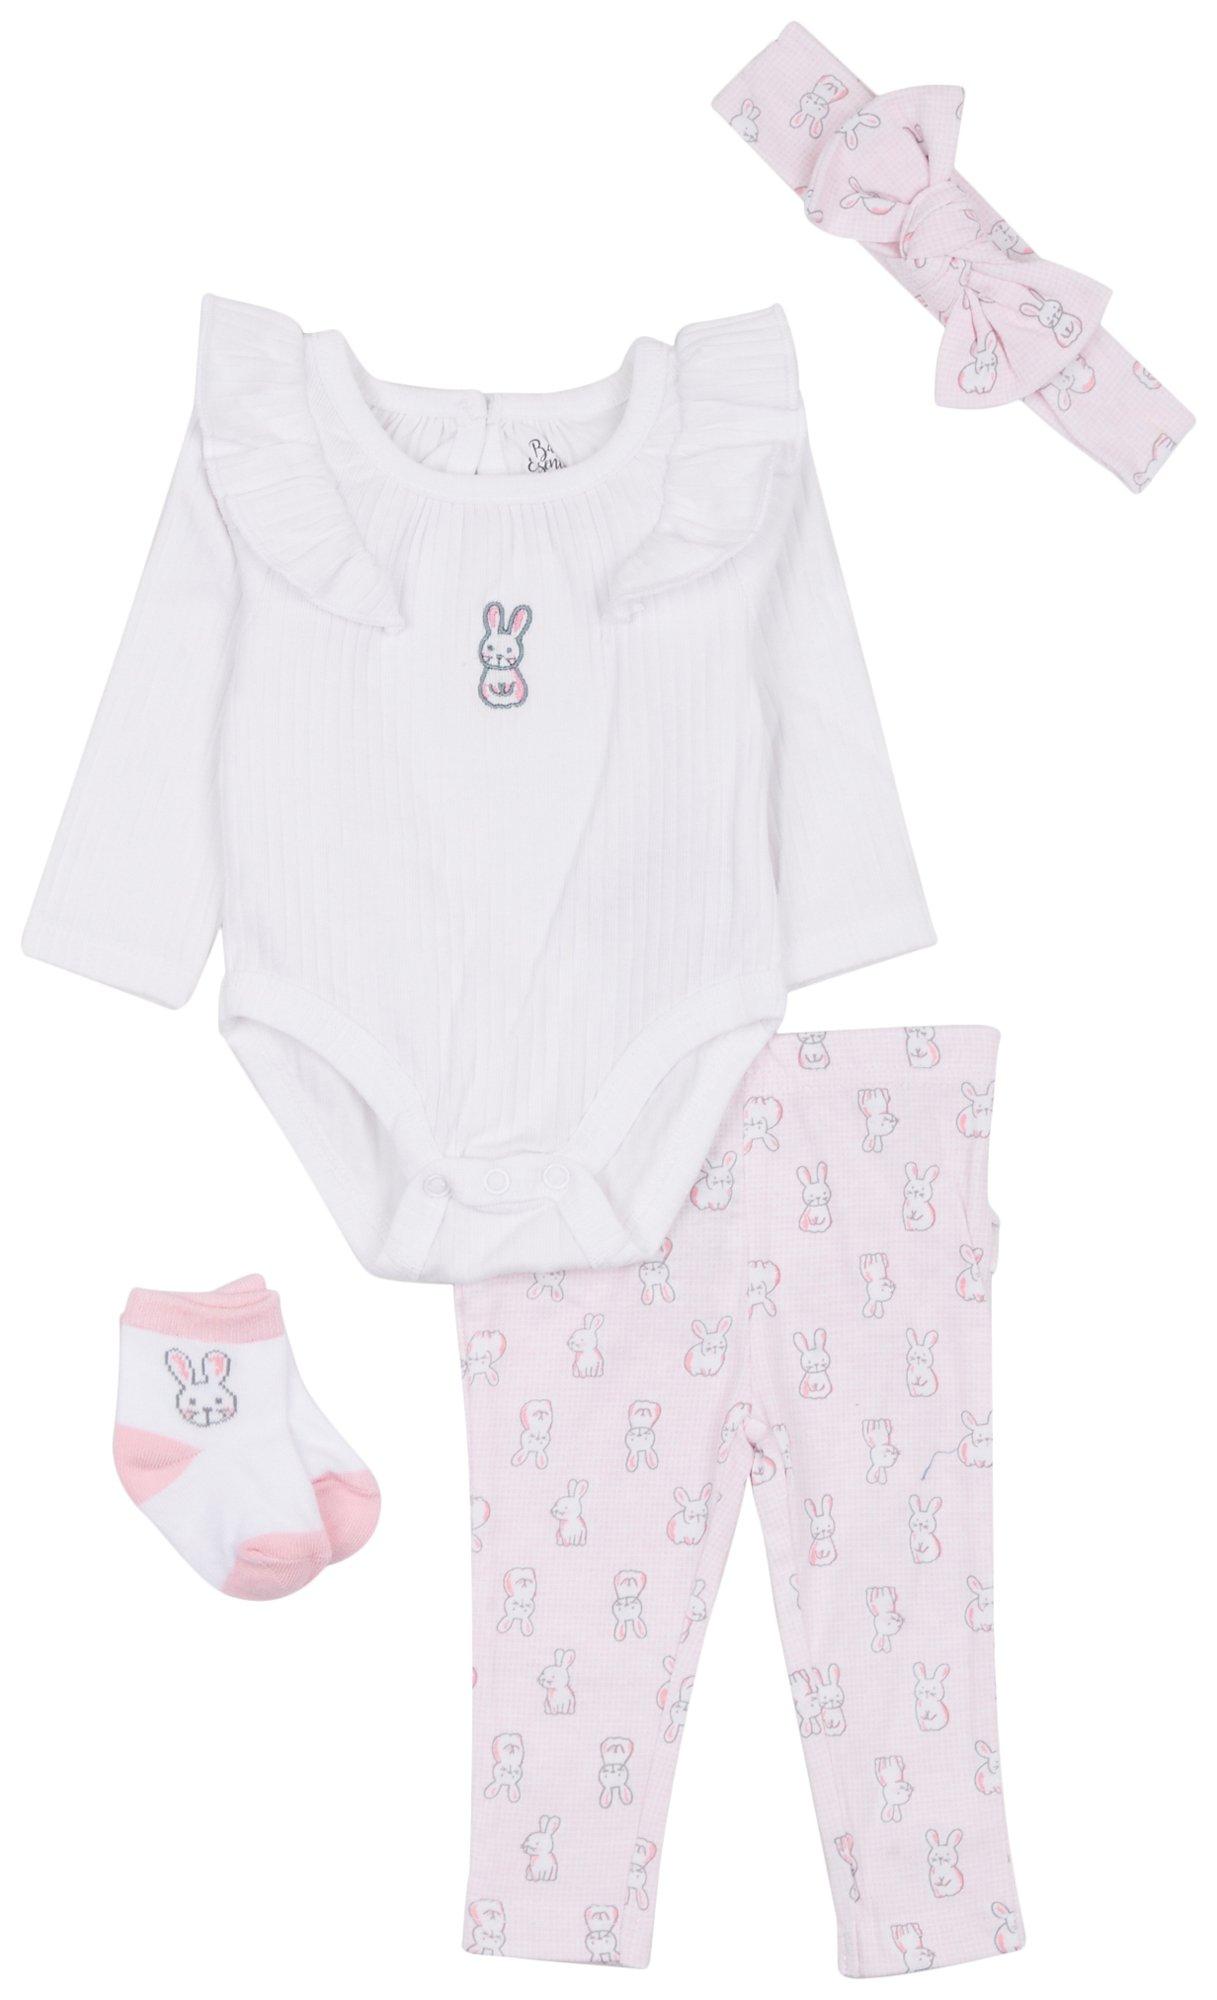 Baby Essentials Baby Girls 4-pc. Easter Bunny Creeper